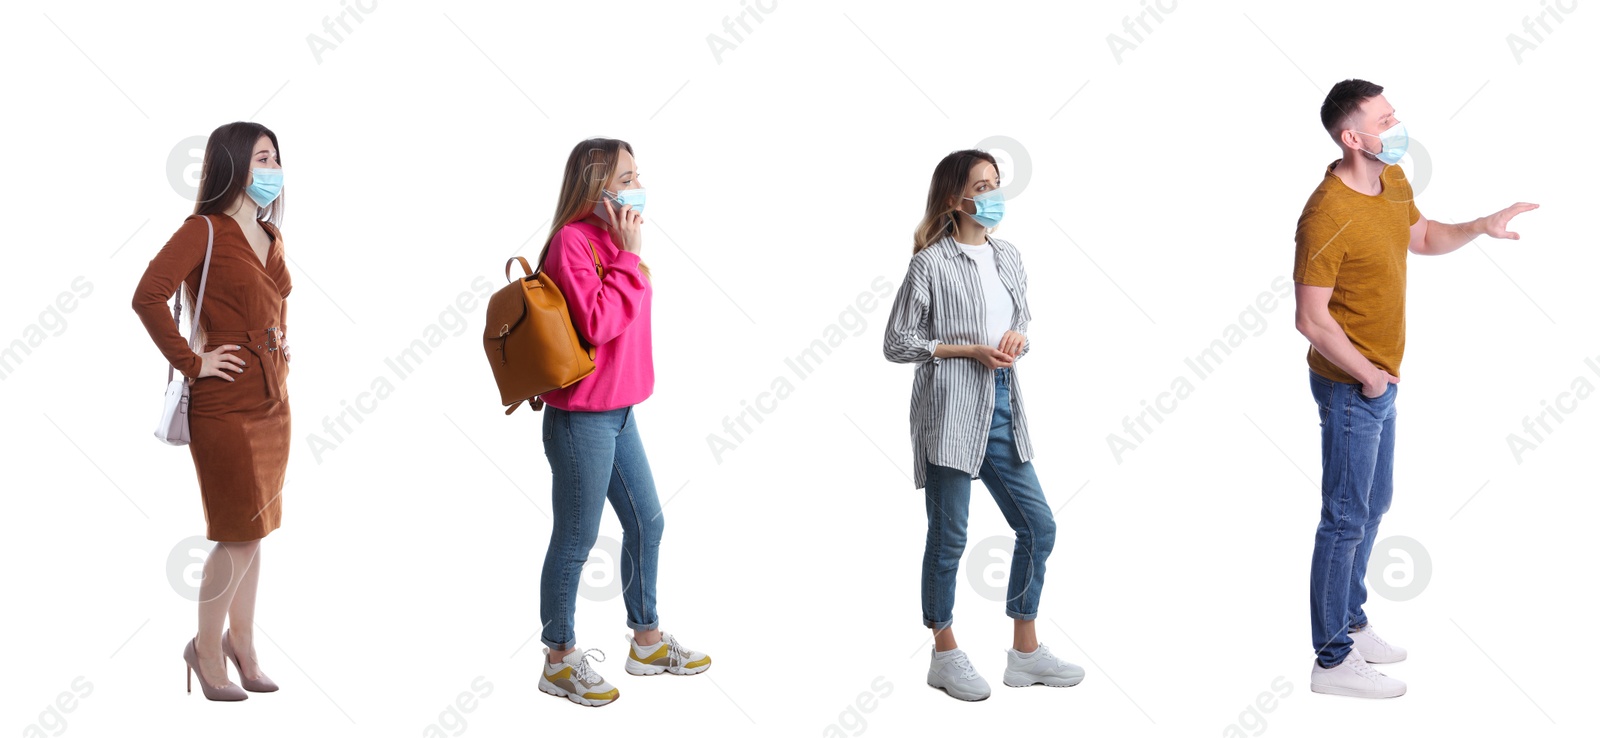 Image of People with protective masks waiting in queue on white background, banner design. Social distancing during Covid-19 pandemic